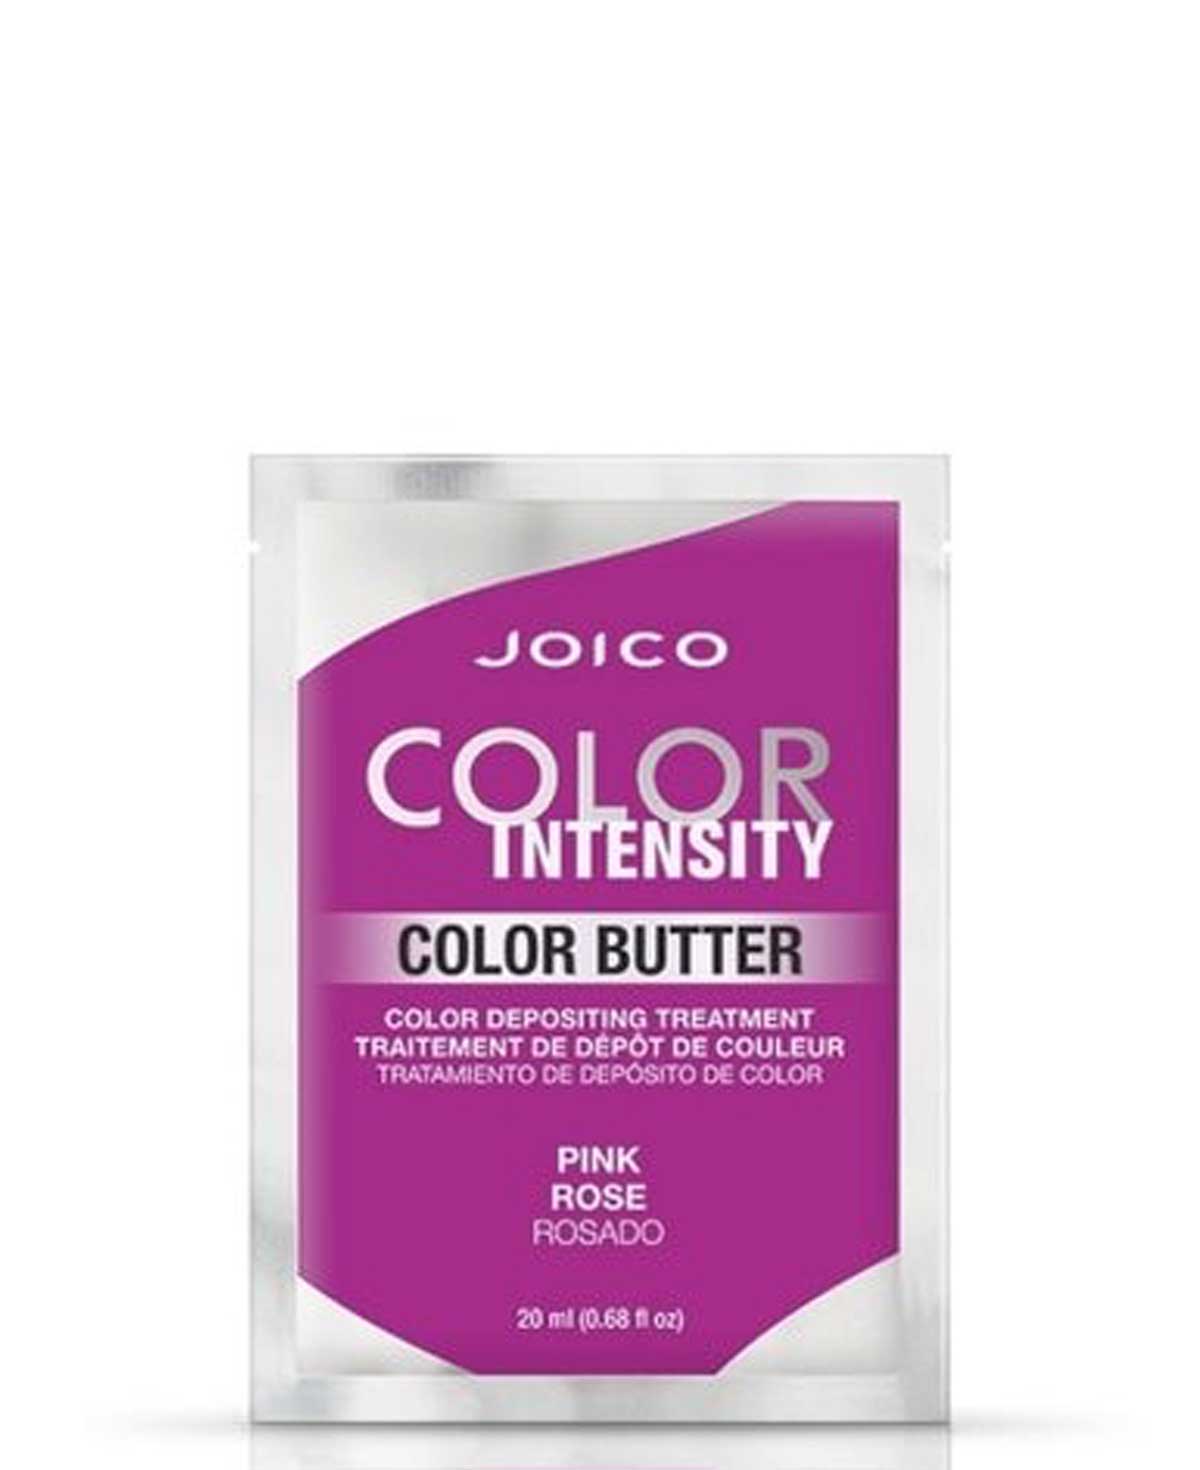 Joico Intensity Color Butter - Foil Pink 20ml